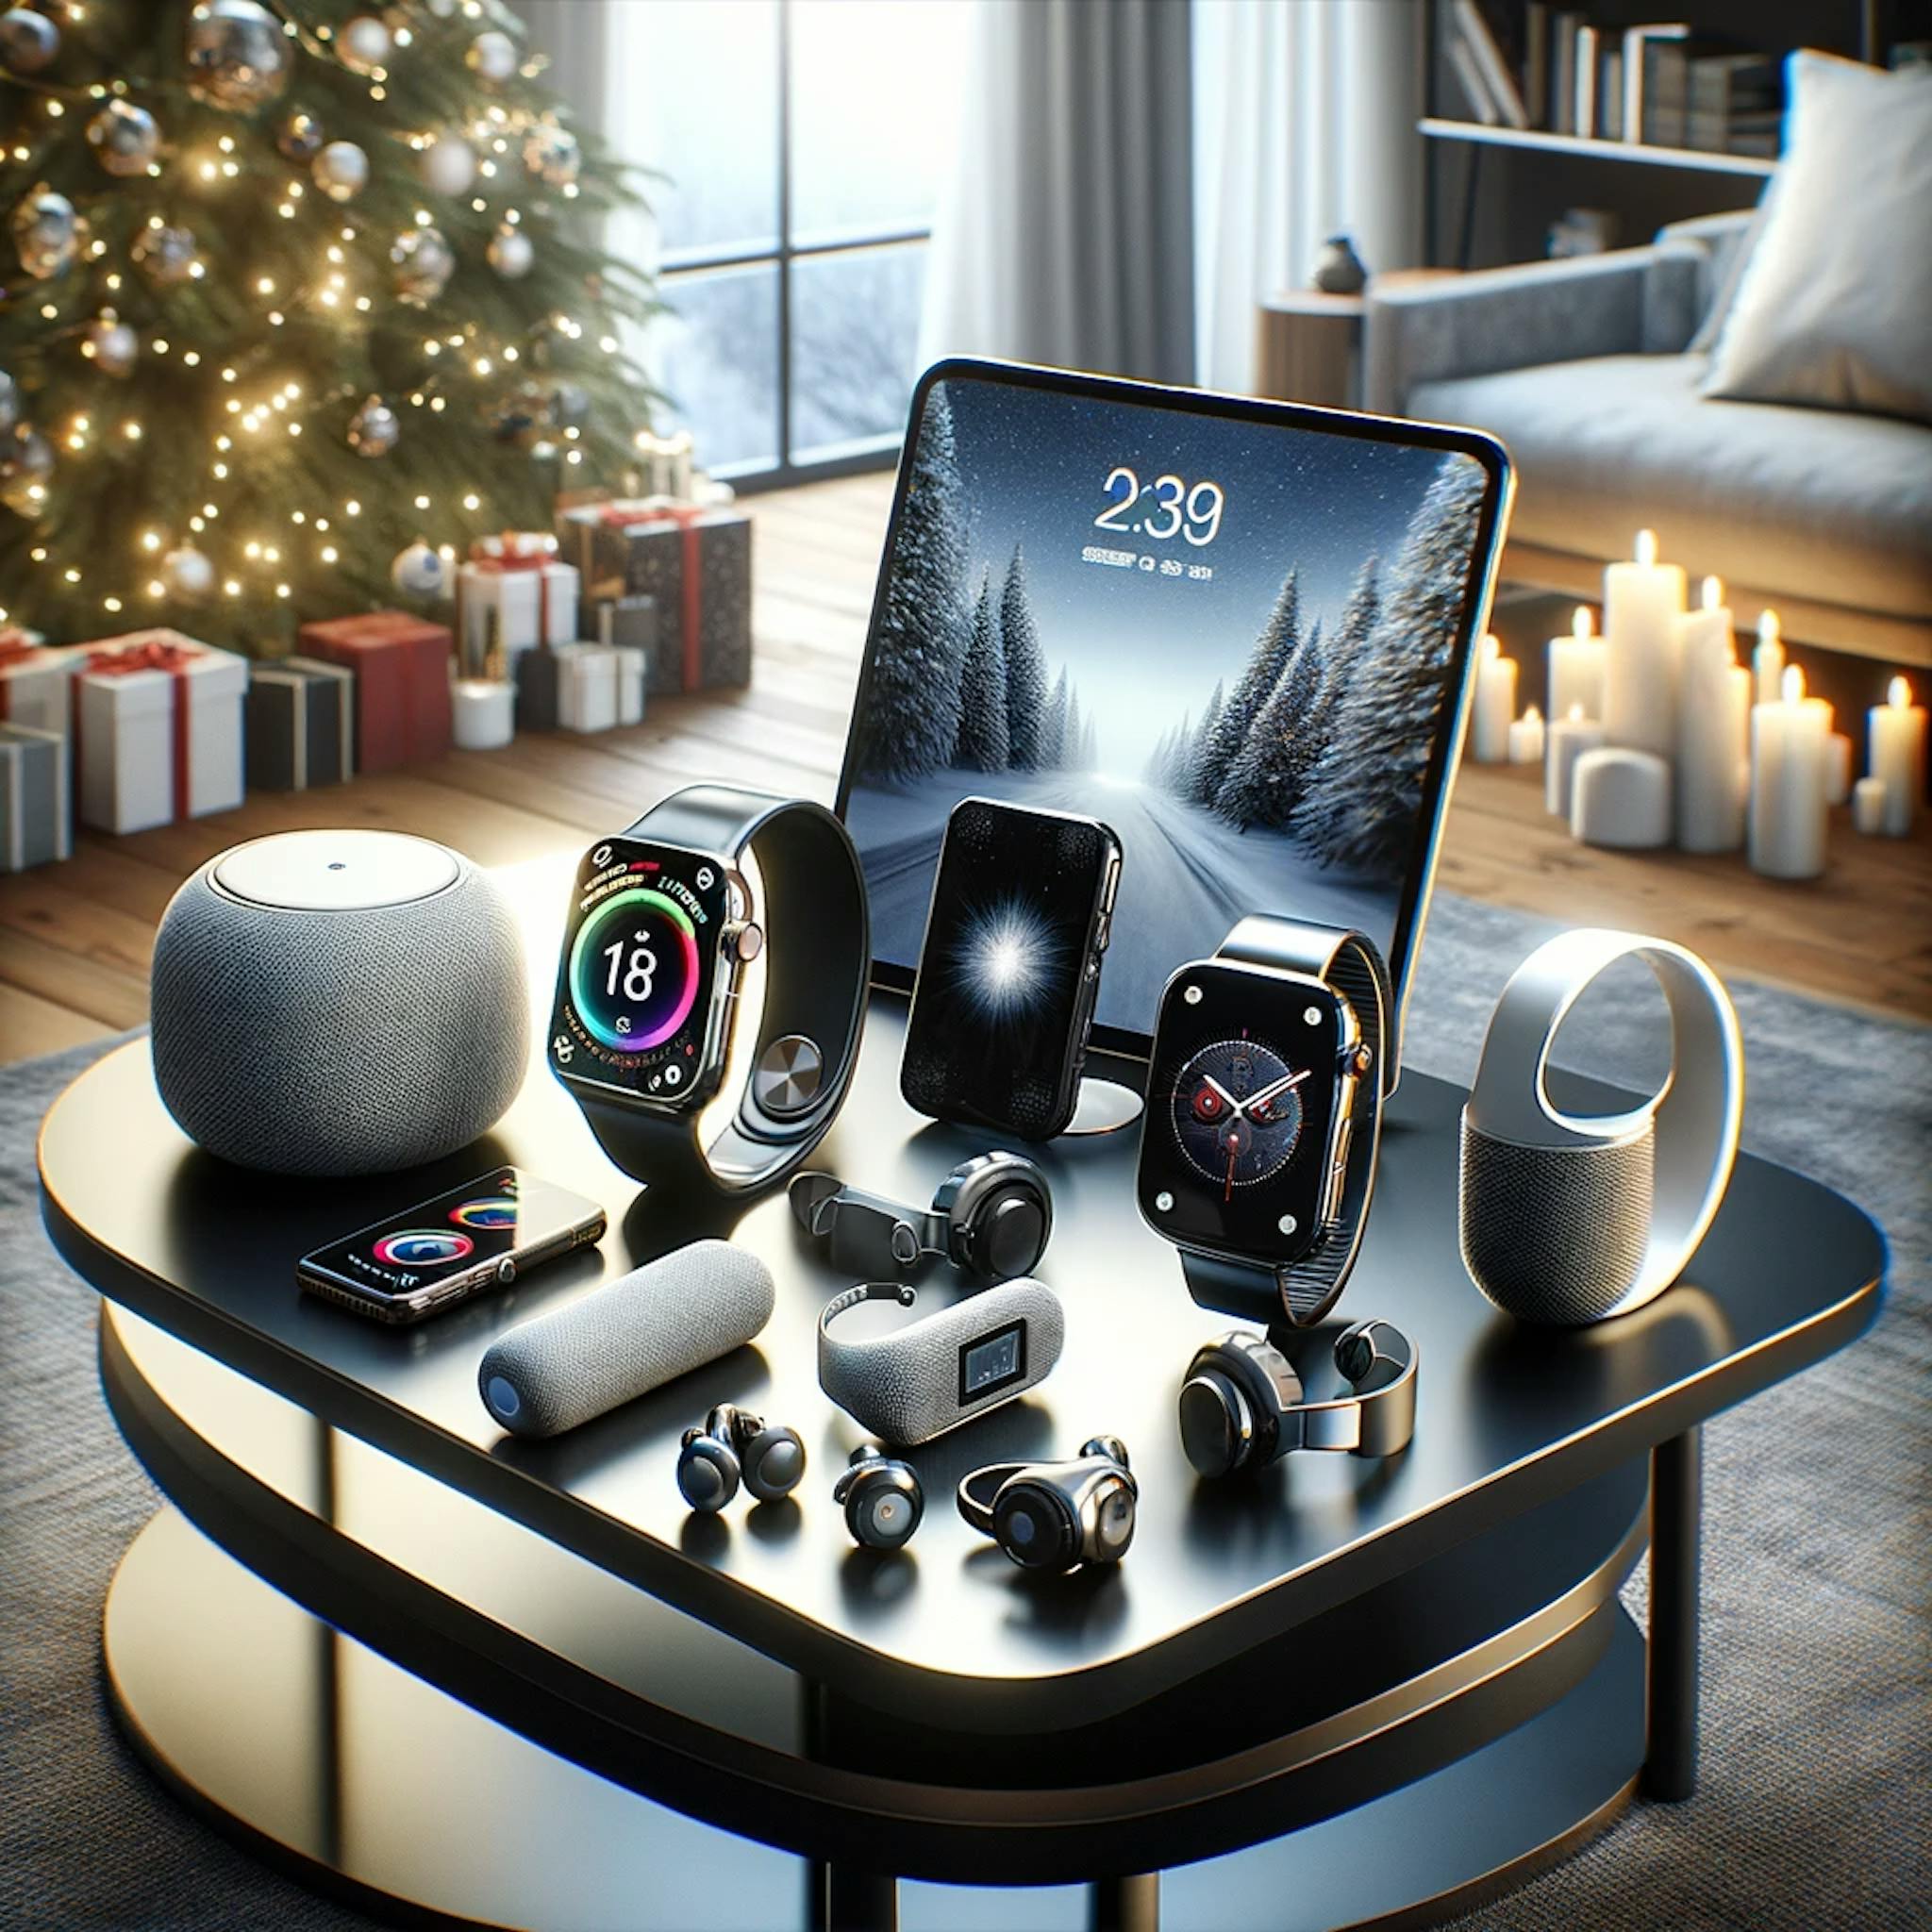 tech gadgets and innovations perfect for a Christmas present.